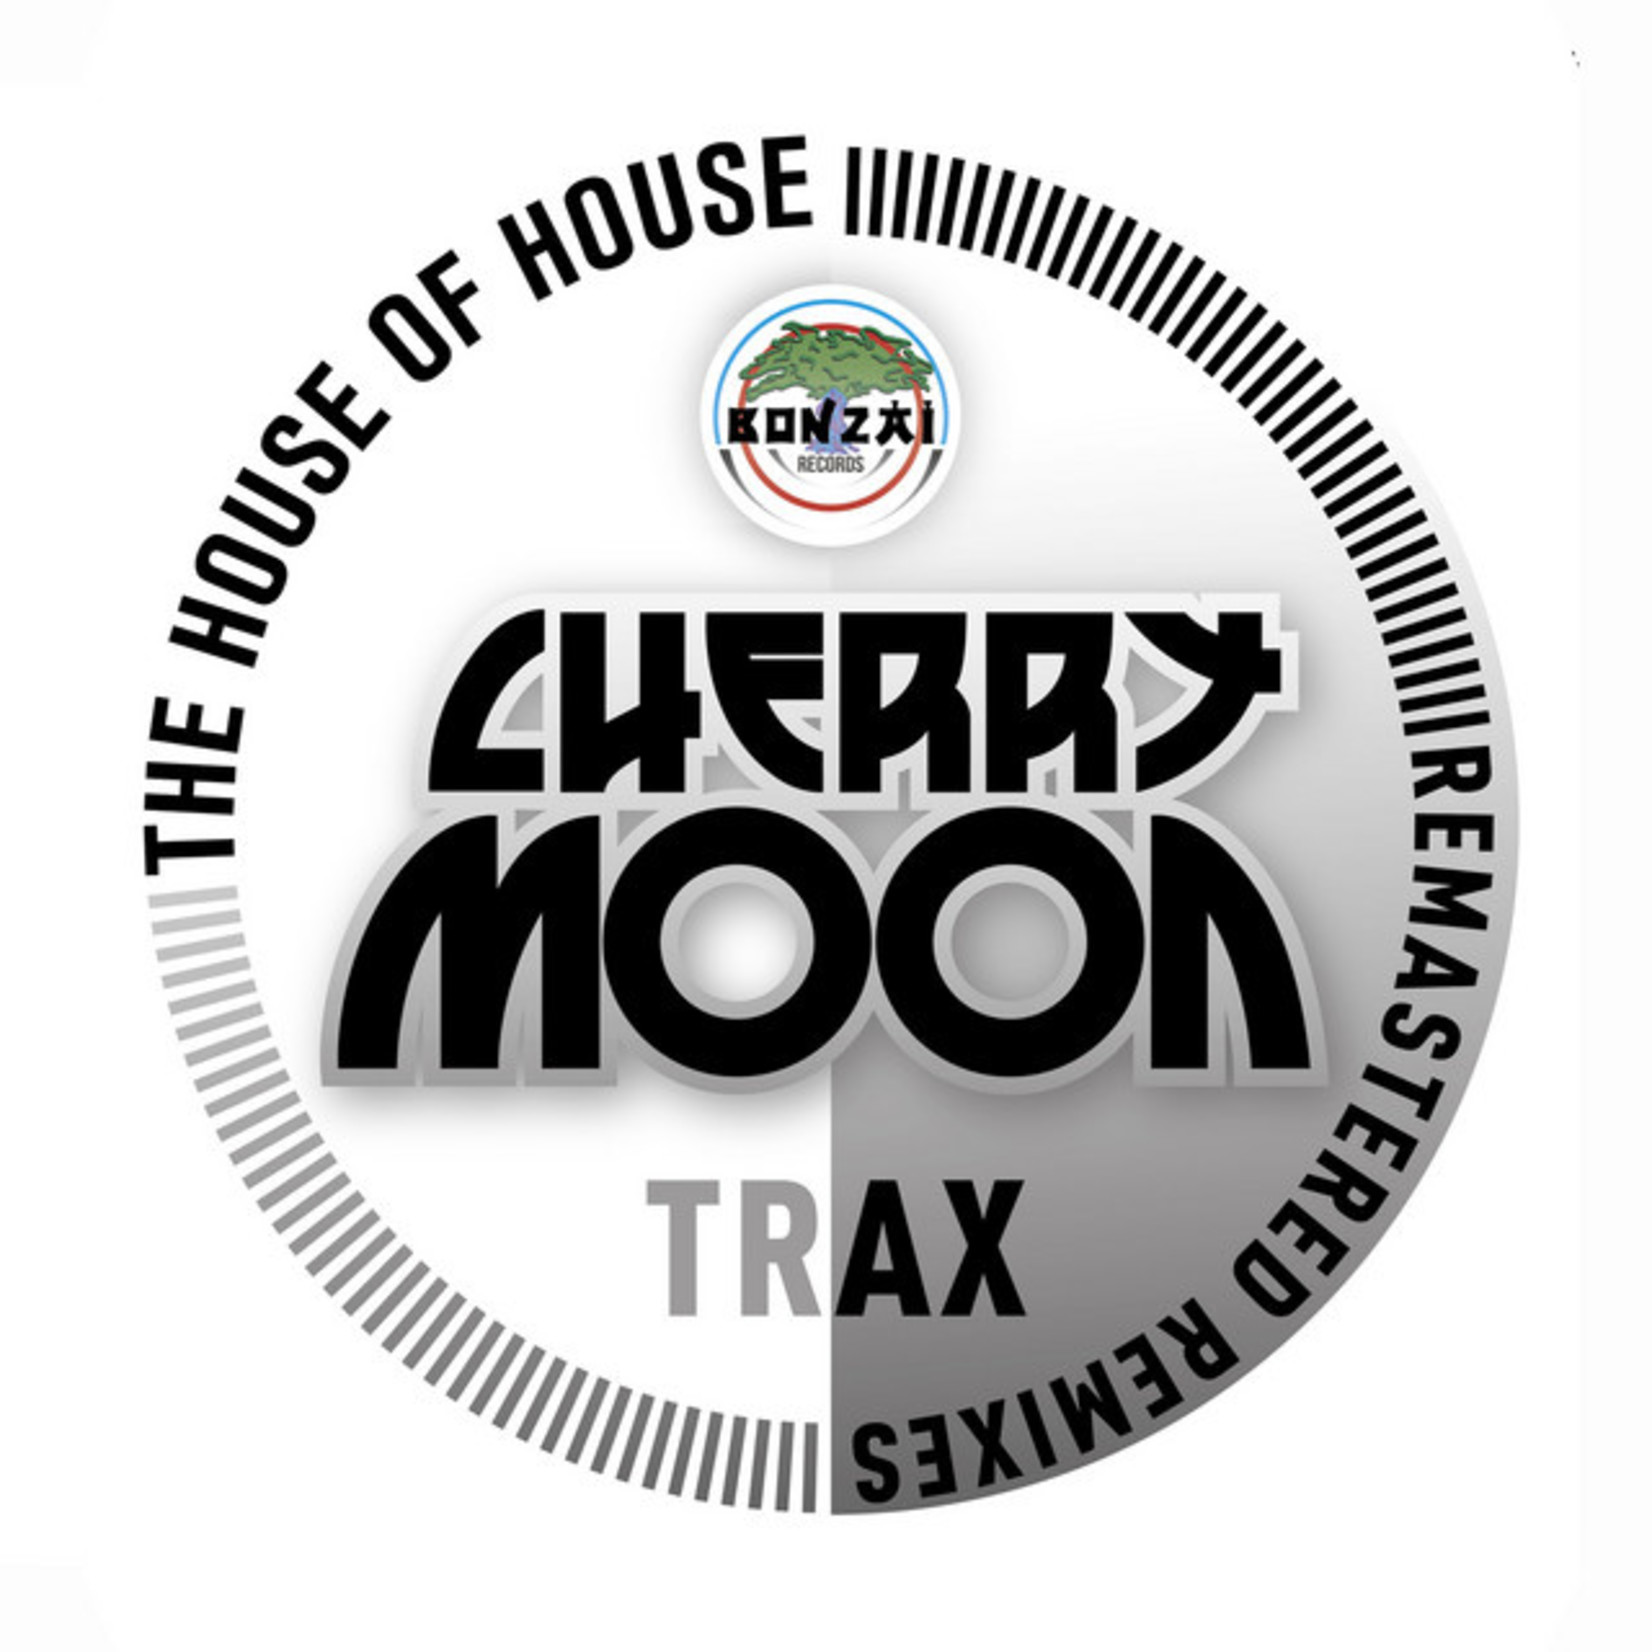 Cherrymoon Trax – The House Of House / Let There Be House